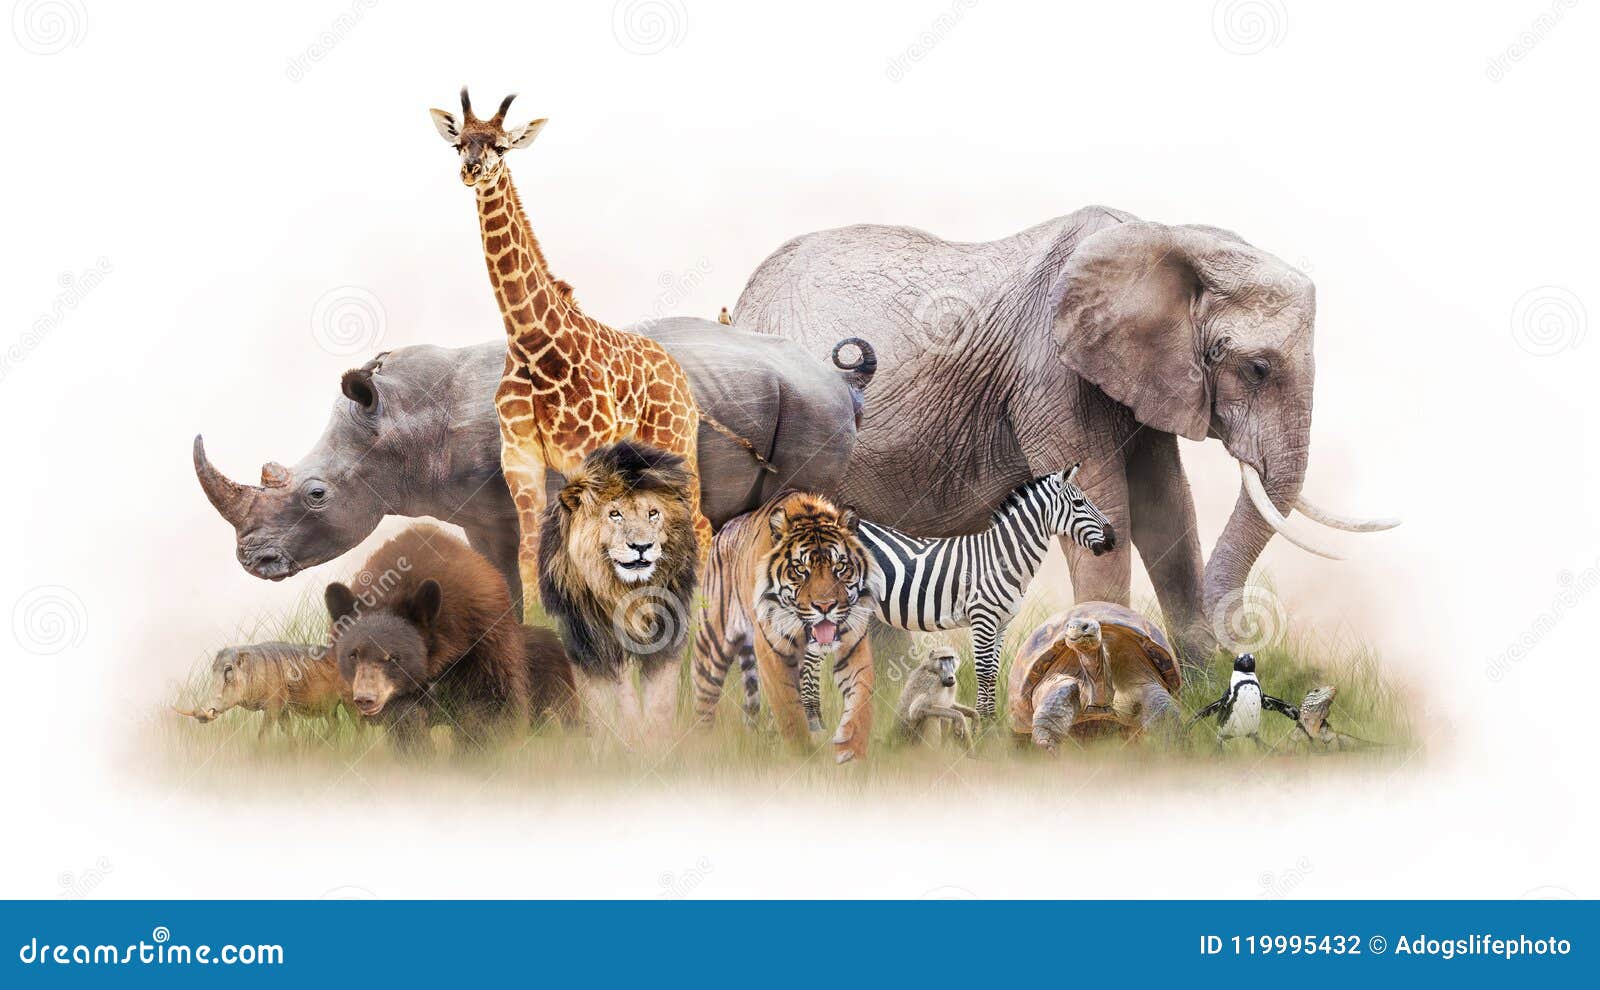 148,047 Zoo Animals Stock Photos - Free & Royalty-Free Stock Photos from  Dreamstime